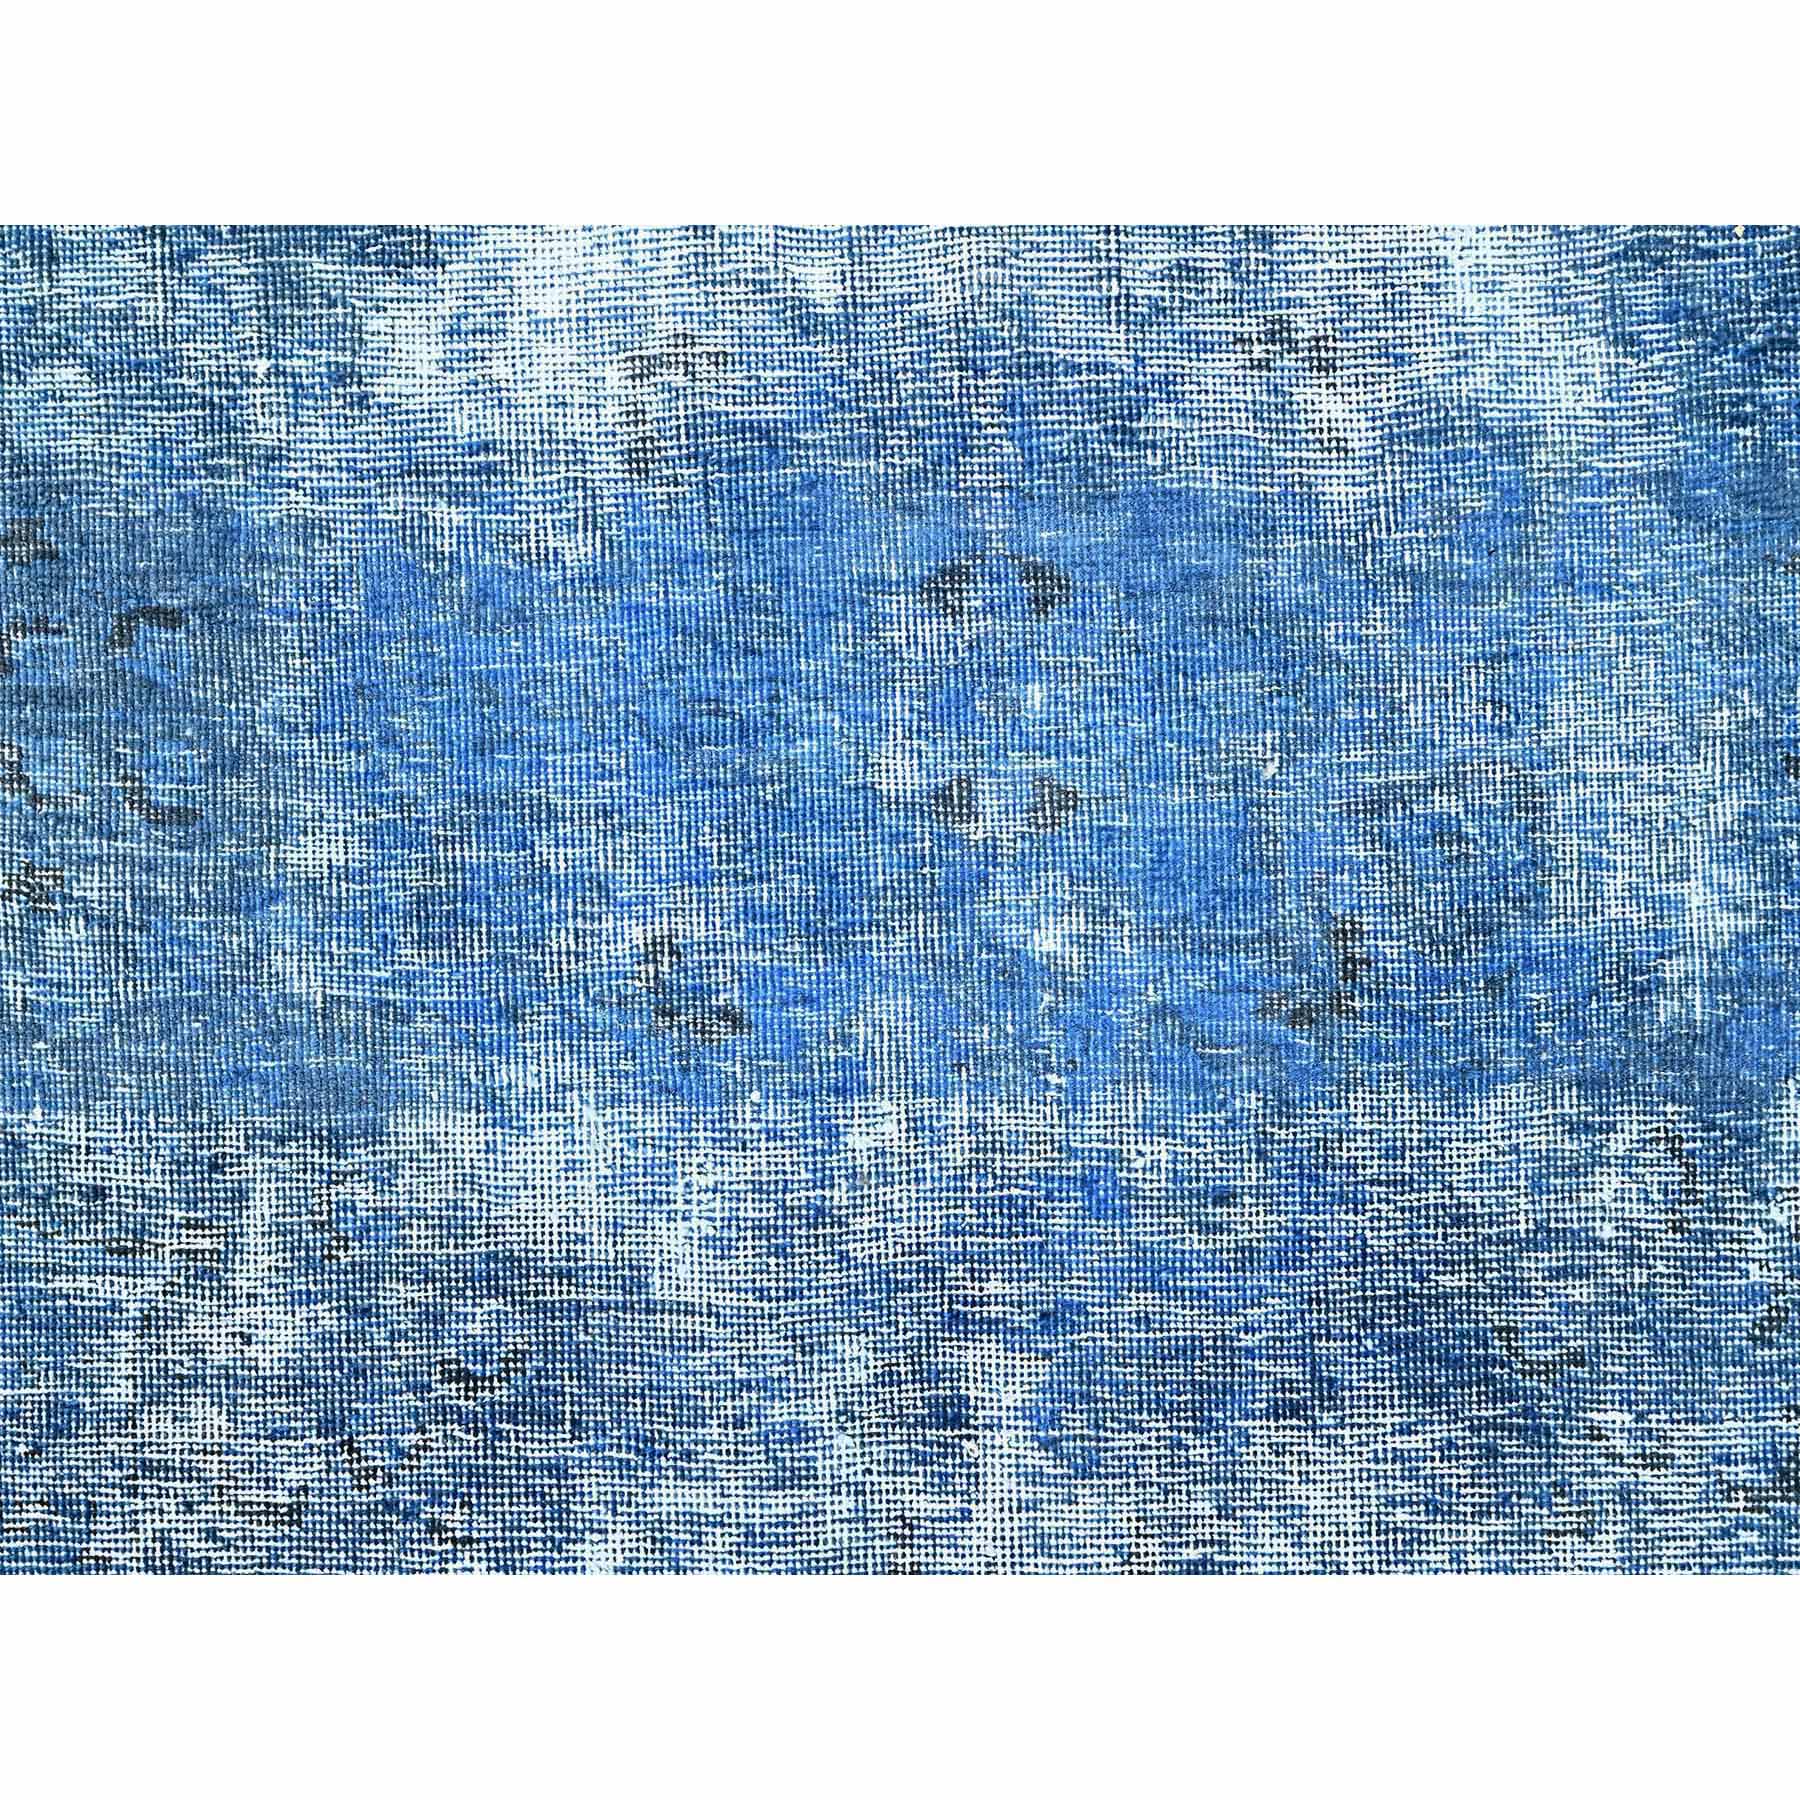 Overdyed-Vintage-Hand-Knotted-Rug-430510